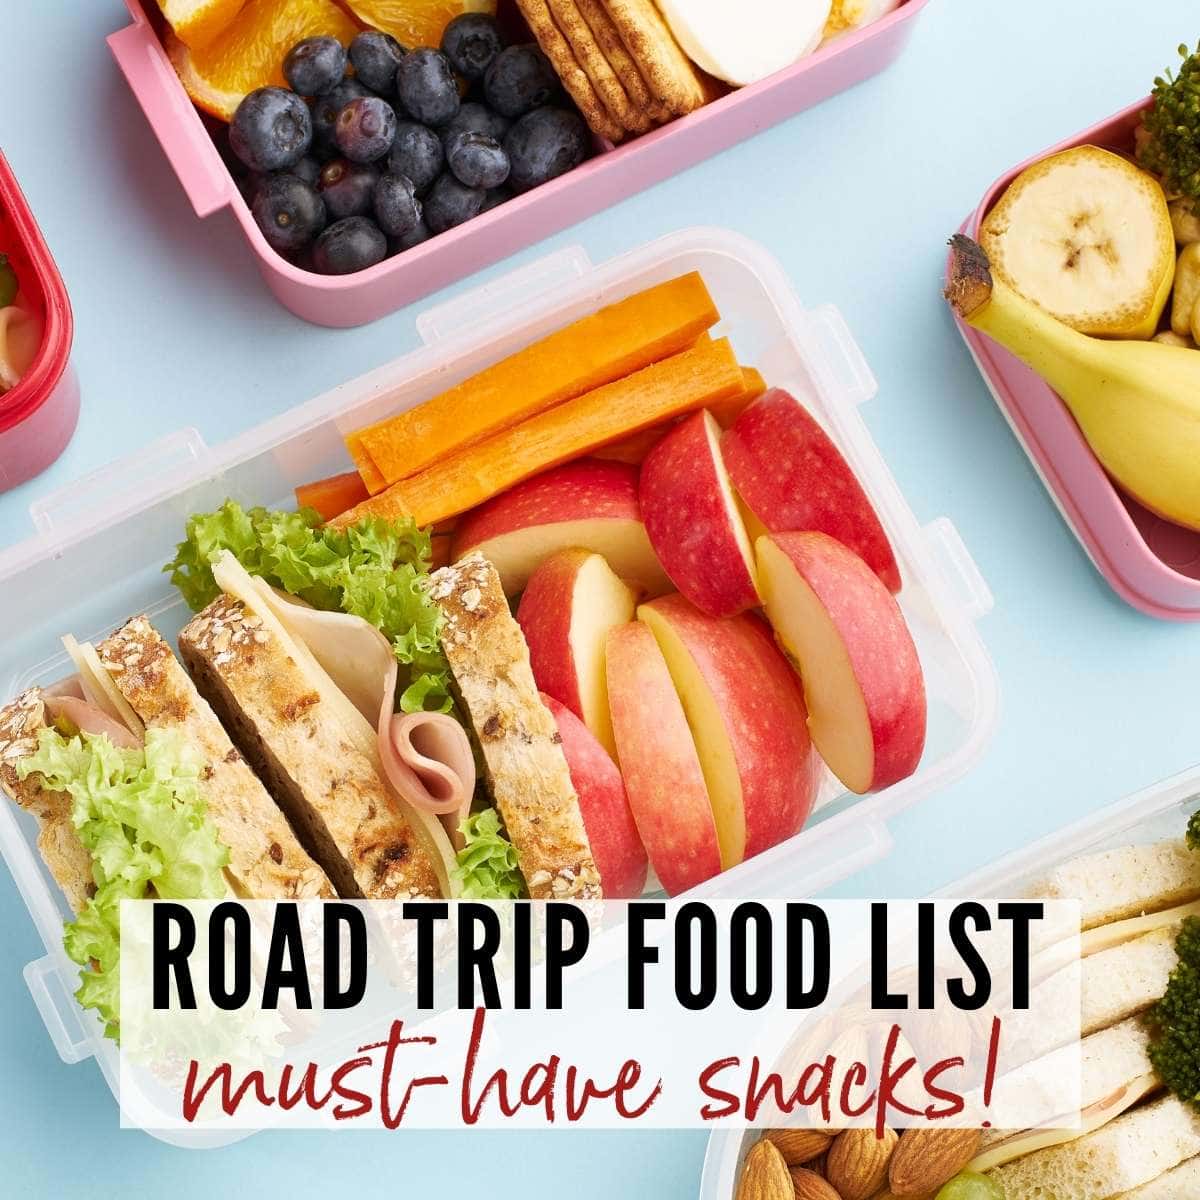 plastic containers filled with fruits, vegetables, nuts, crackers and sandwiches with Road Trip Food List graphic overlay